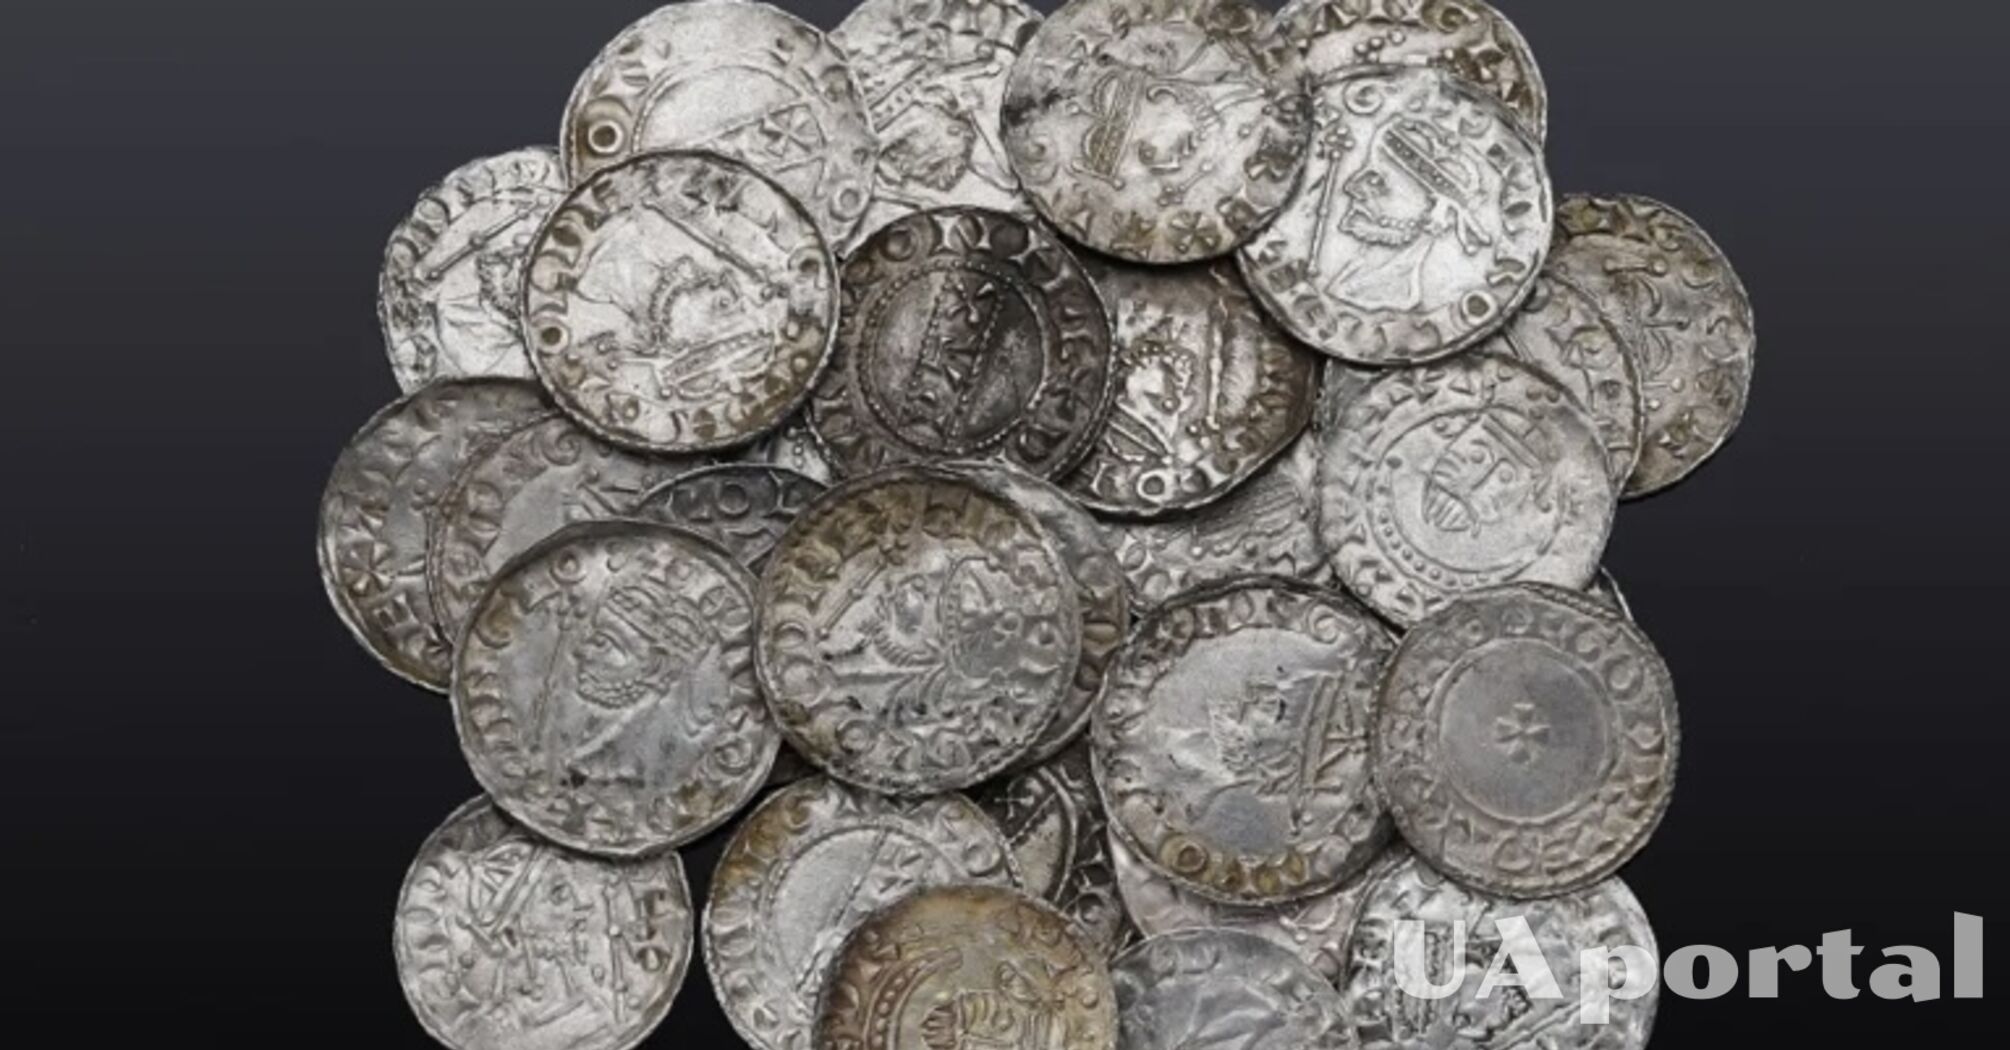 122 1000-year-old silver coins in excellent condition found in England